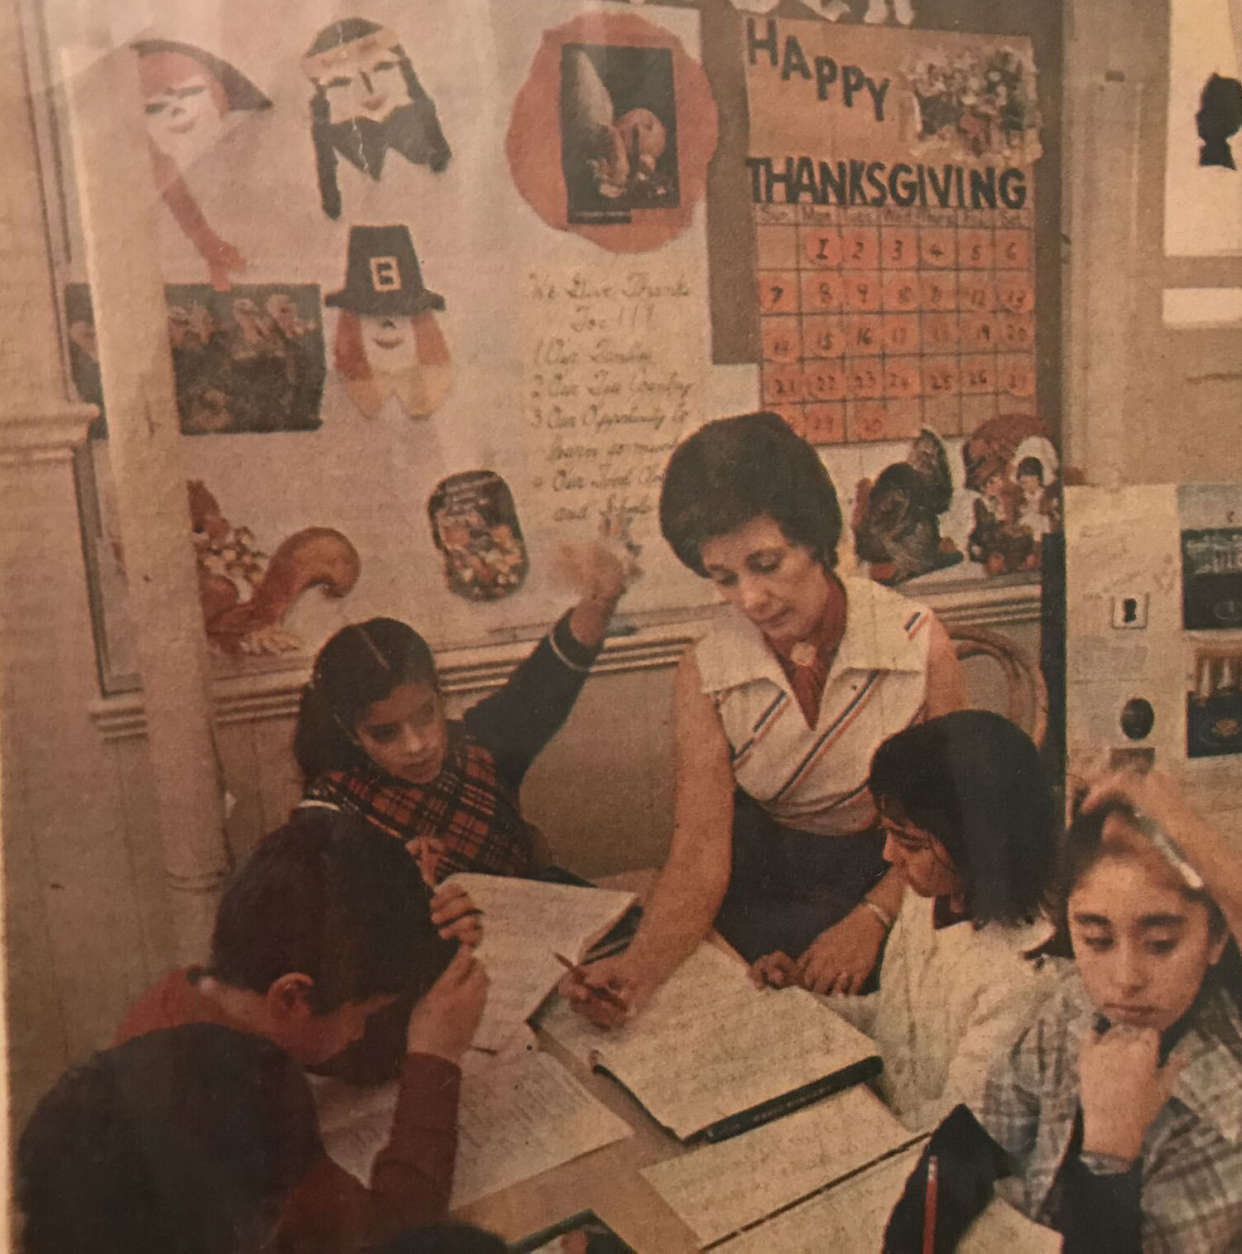 Inside the fourth-grade class at Stevens Elementary where Verona Meeder taught seen in a December 1976 photograph, about a month before Amy Carter moved to Washington. (Courtesy Verona Meeder)